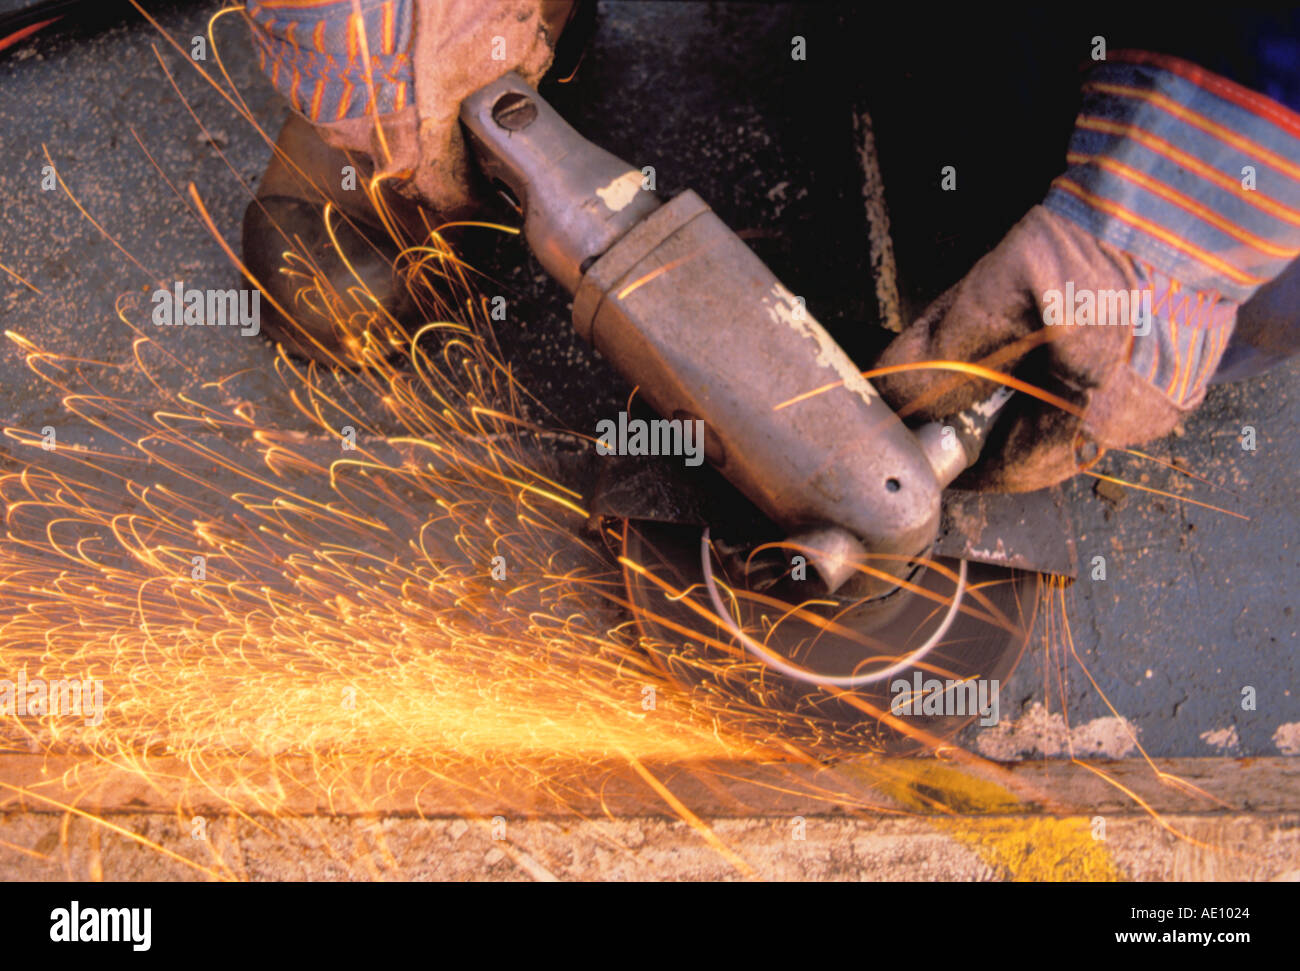 Grinding steel using a pneumatically powered grinder Stock Photo